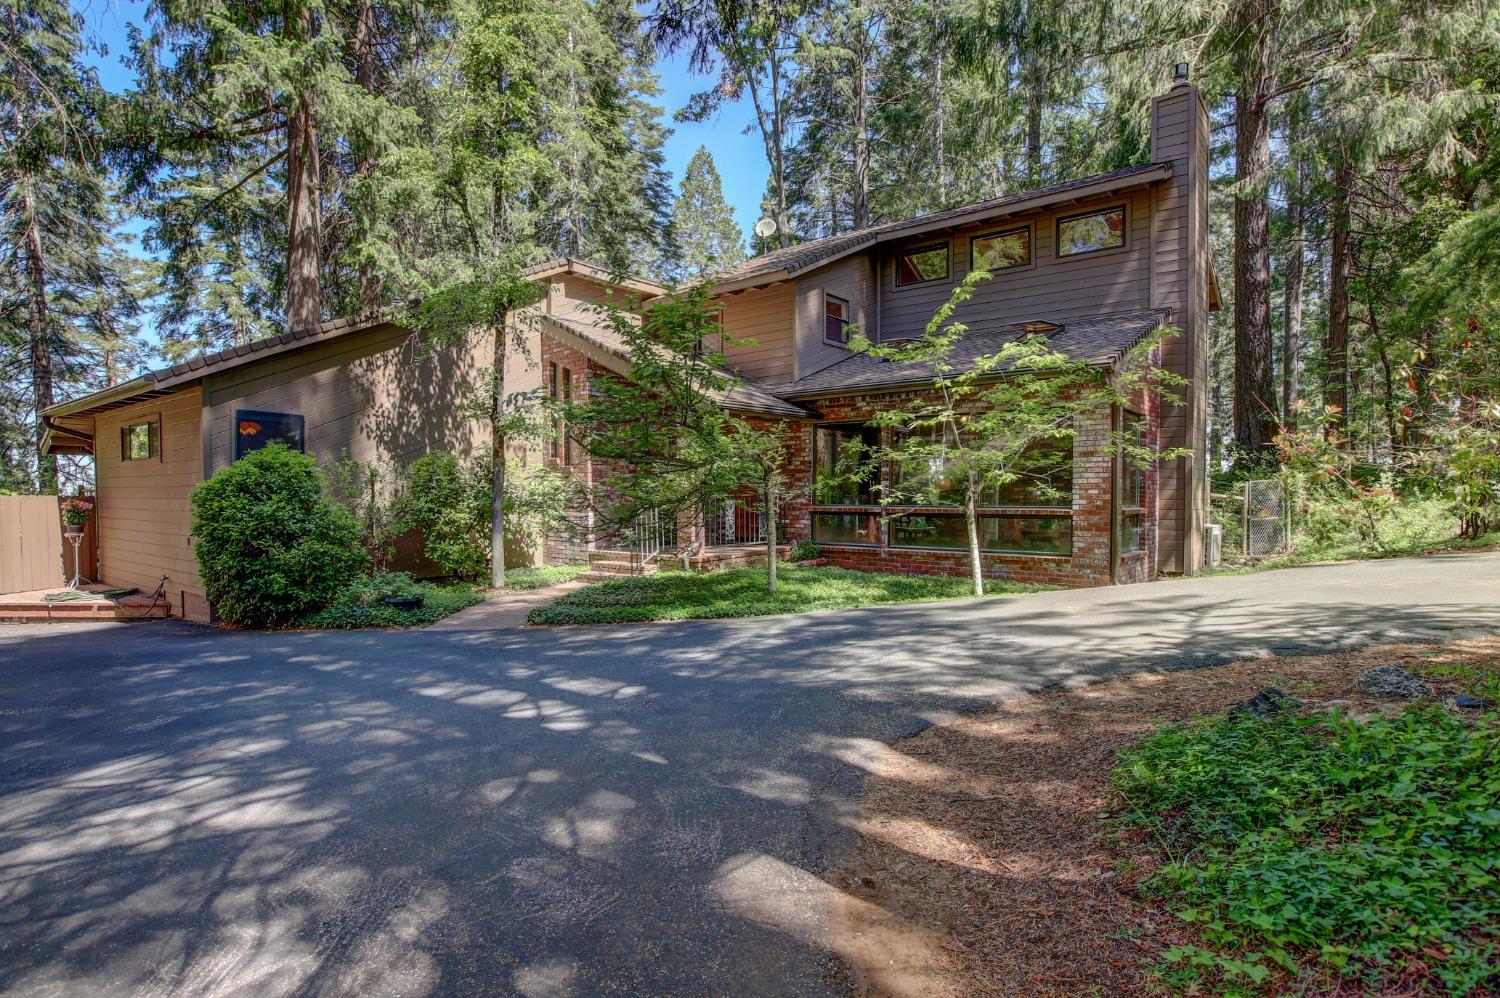 Photo of 14570 Banner Quaker Hill Rd in Nevada City, CA